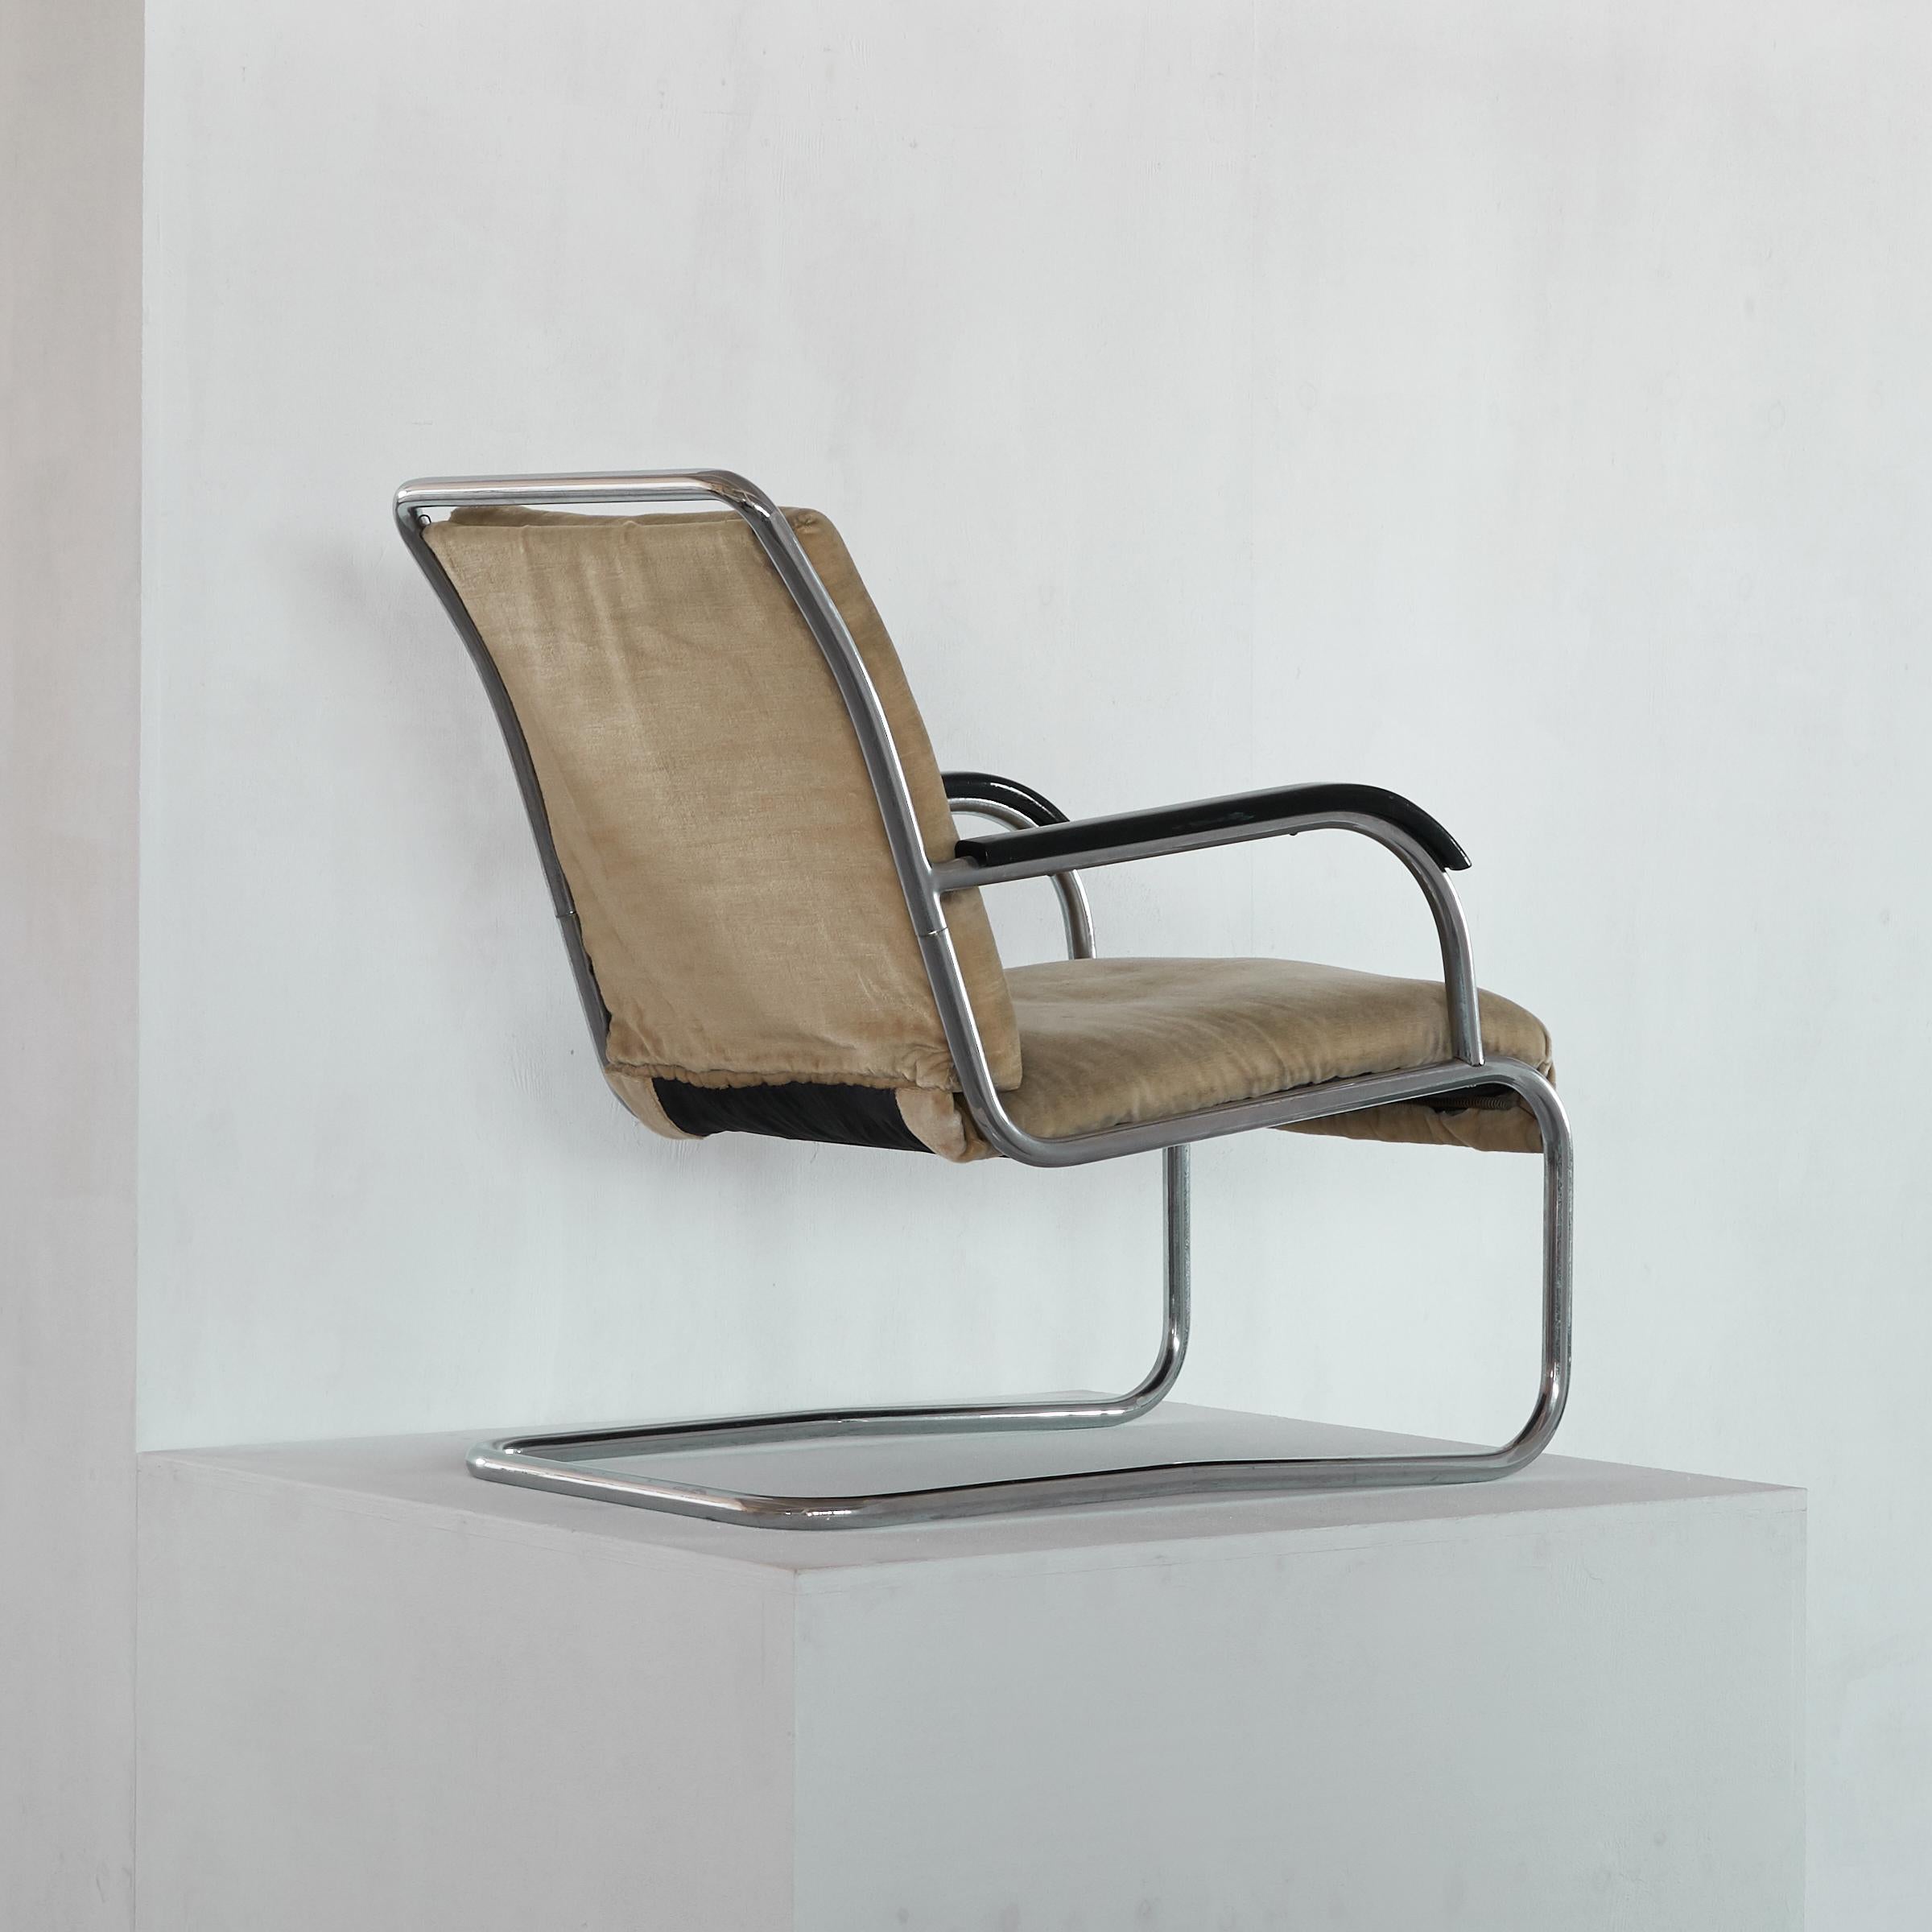 Bauhaus Early Cantilever Lounge Chair by Paul Schuitema For Sale